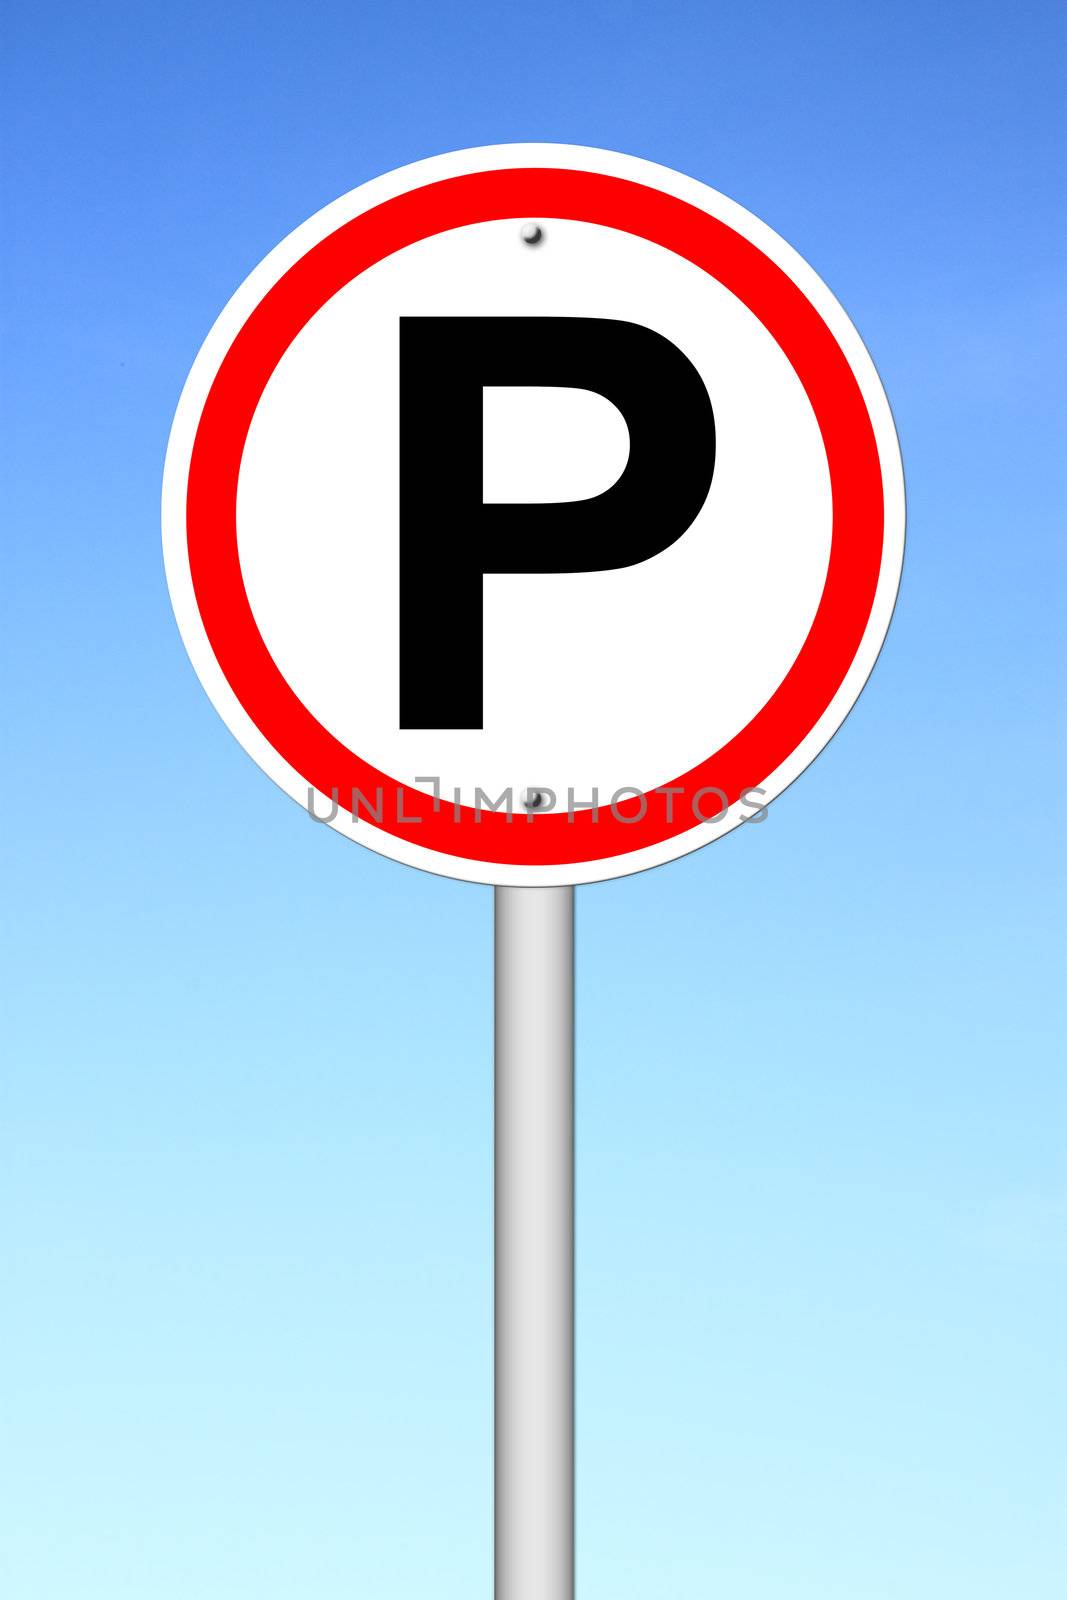 Parking sign over a sky by geargodz